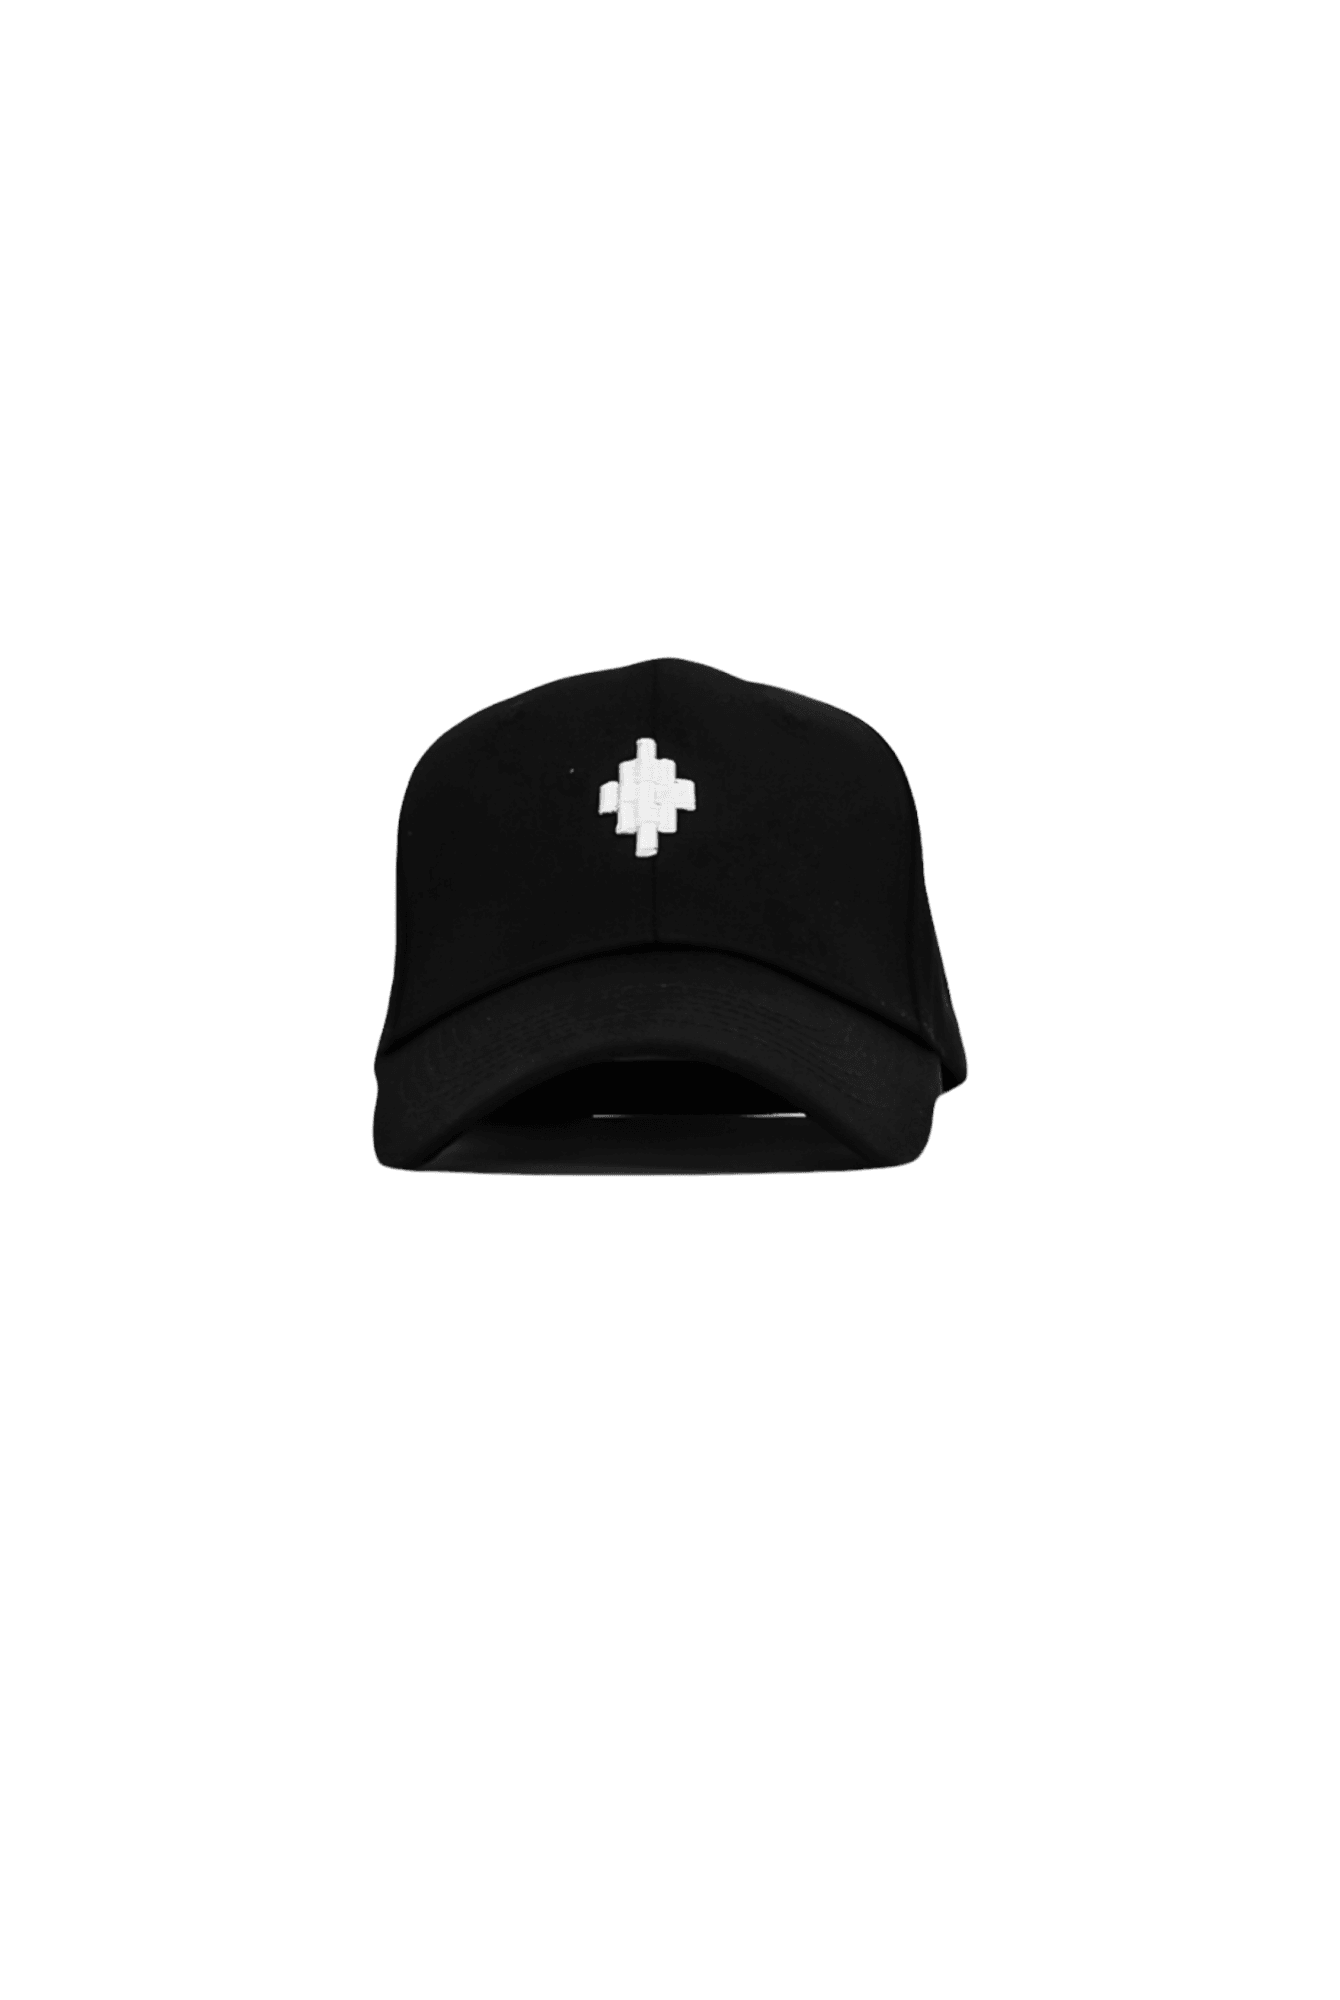 EMBROIDERED CAP - MICH & JANE